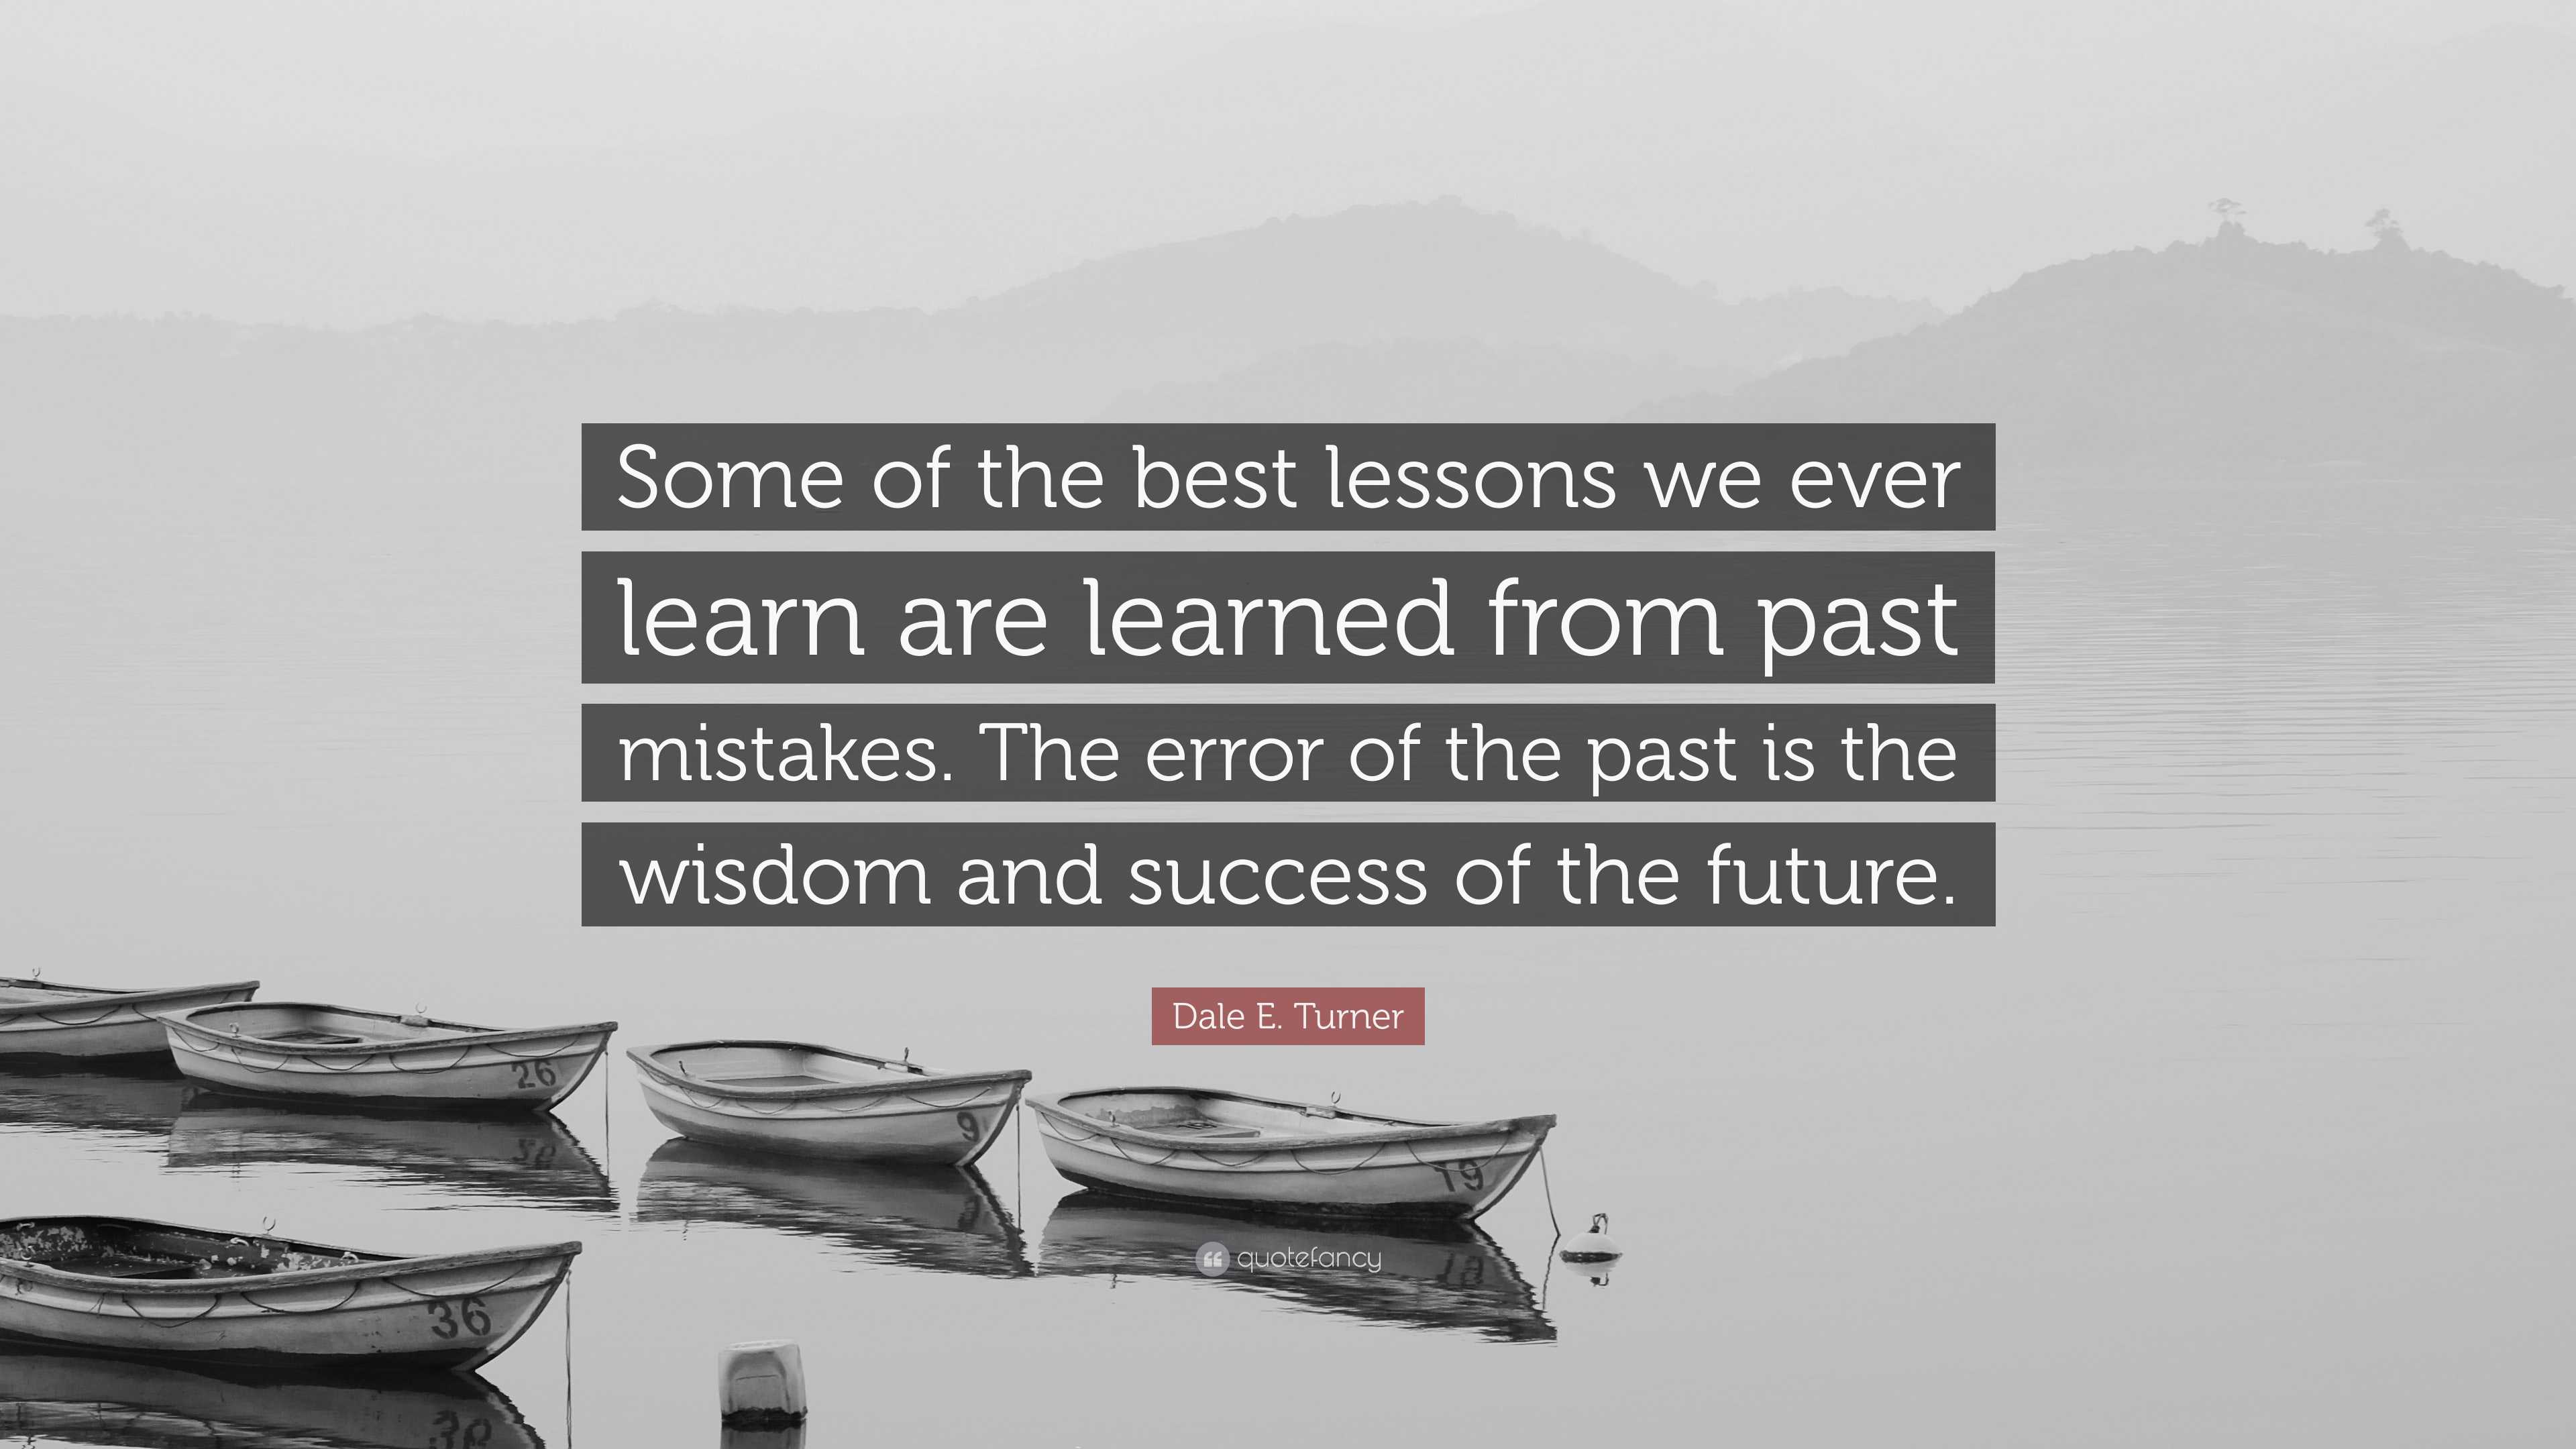 The Lessons you've Learned from the Past, are the Lessons you will